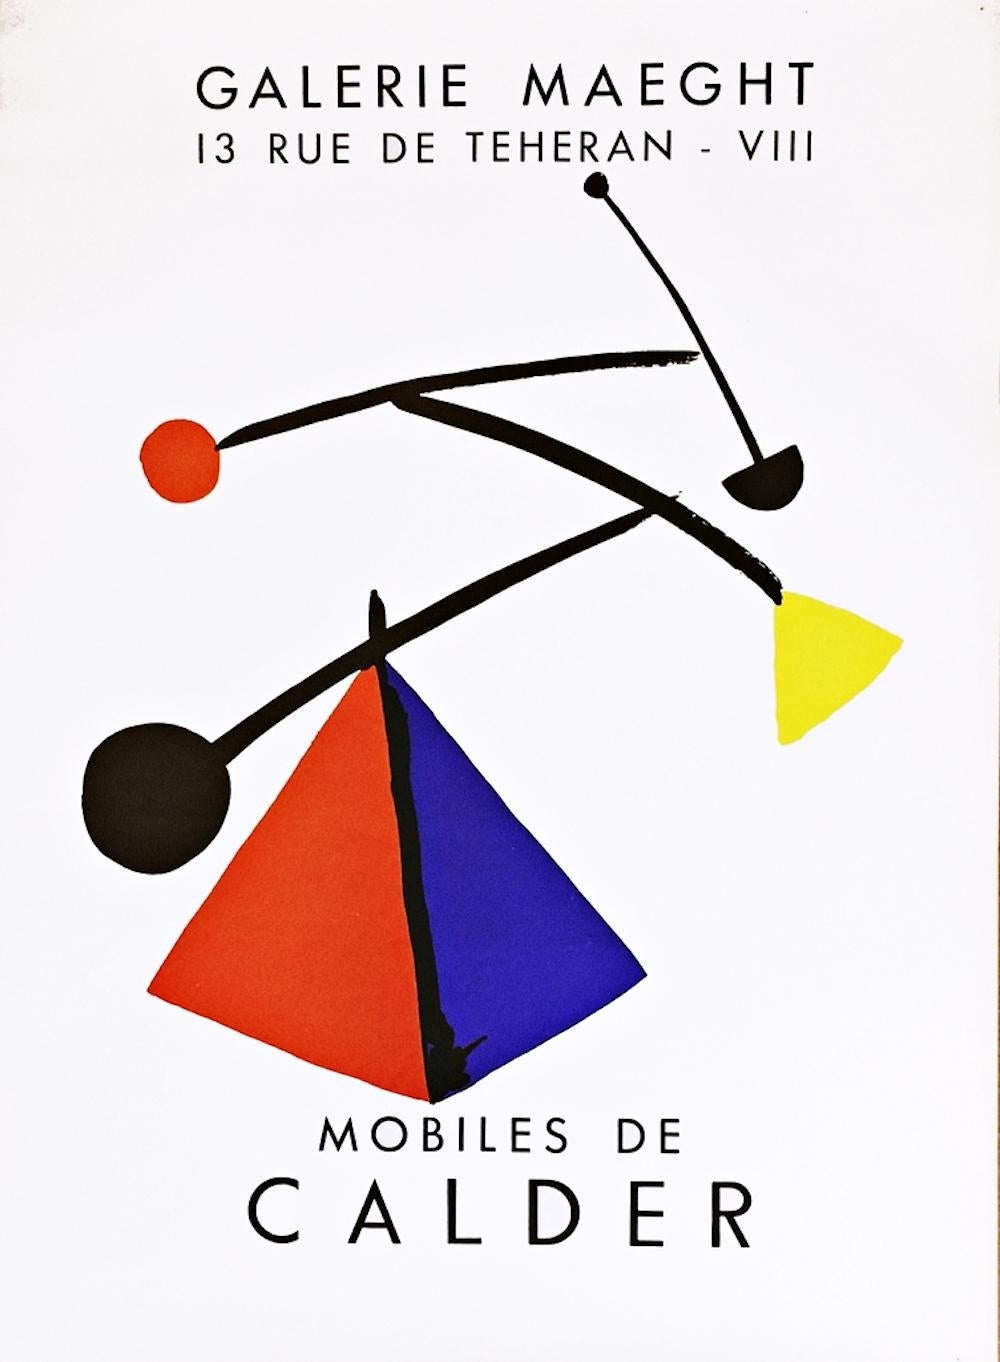 After Alexander Calder
Mobiles de Calder poster, 1954
Original offset lithograph poster
28 × 20 1/2 inches
Unframed
This is from the first vintage edition, not a later, smaller reproduction and not a reprint
In very good vintage condition with